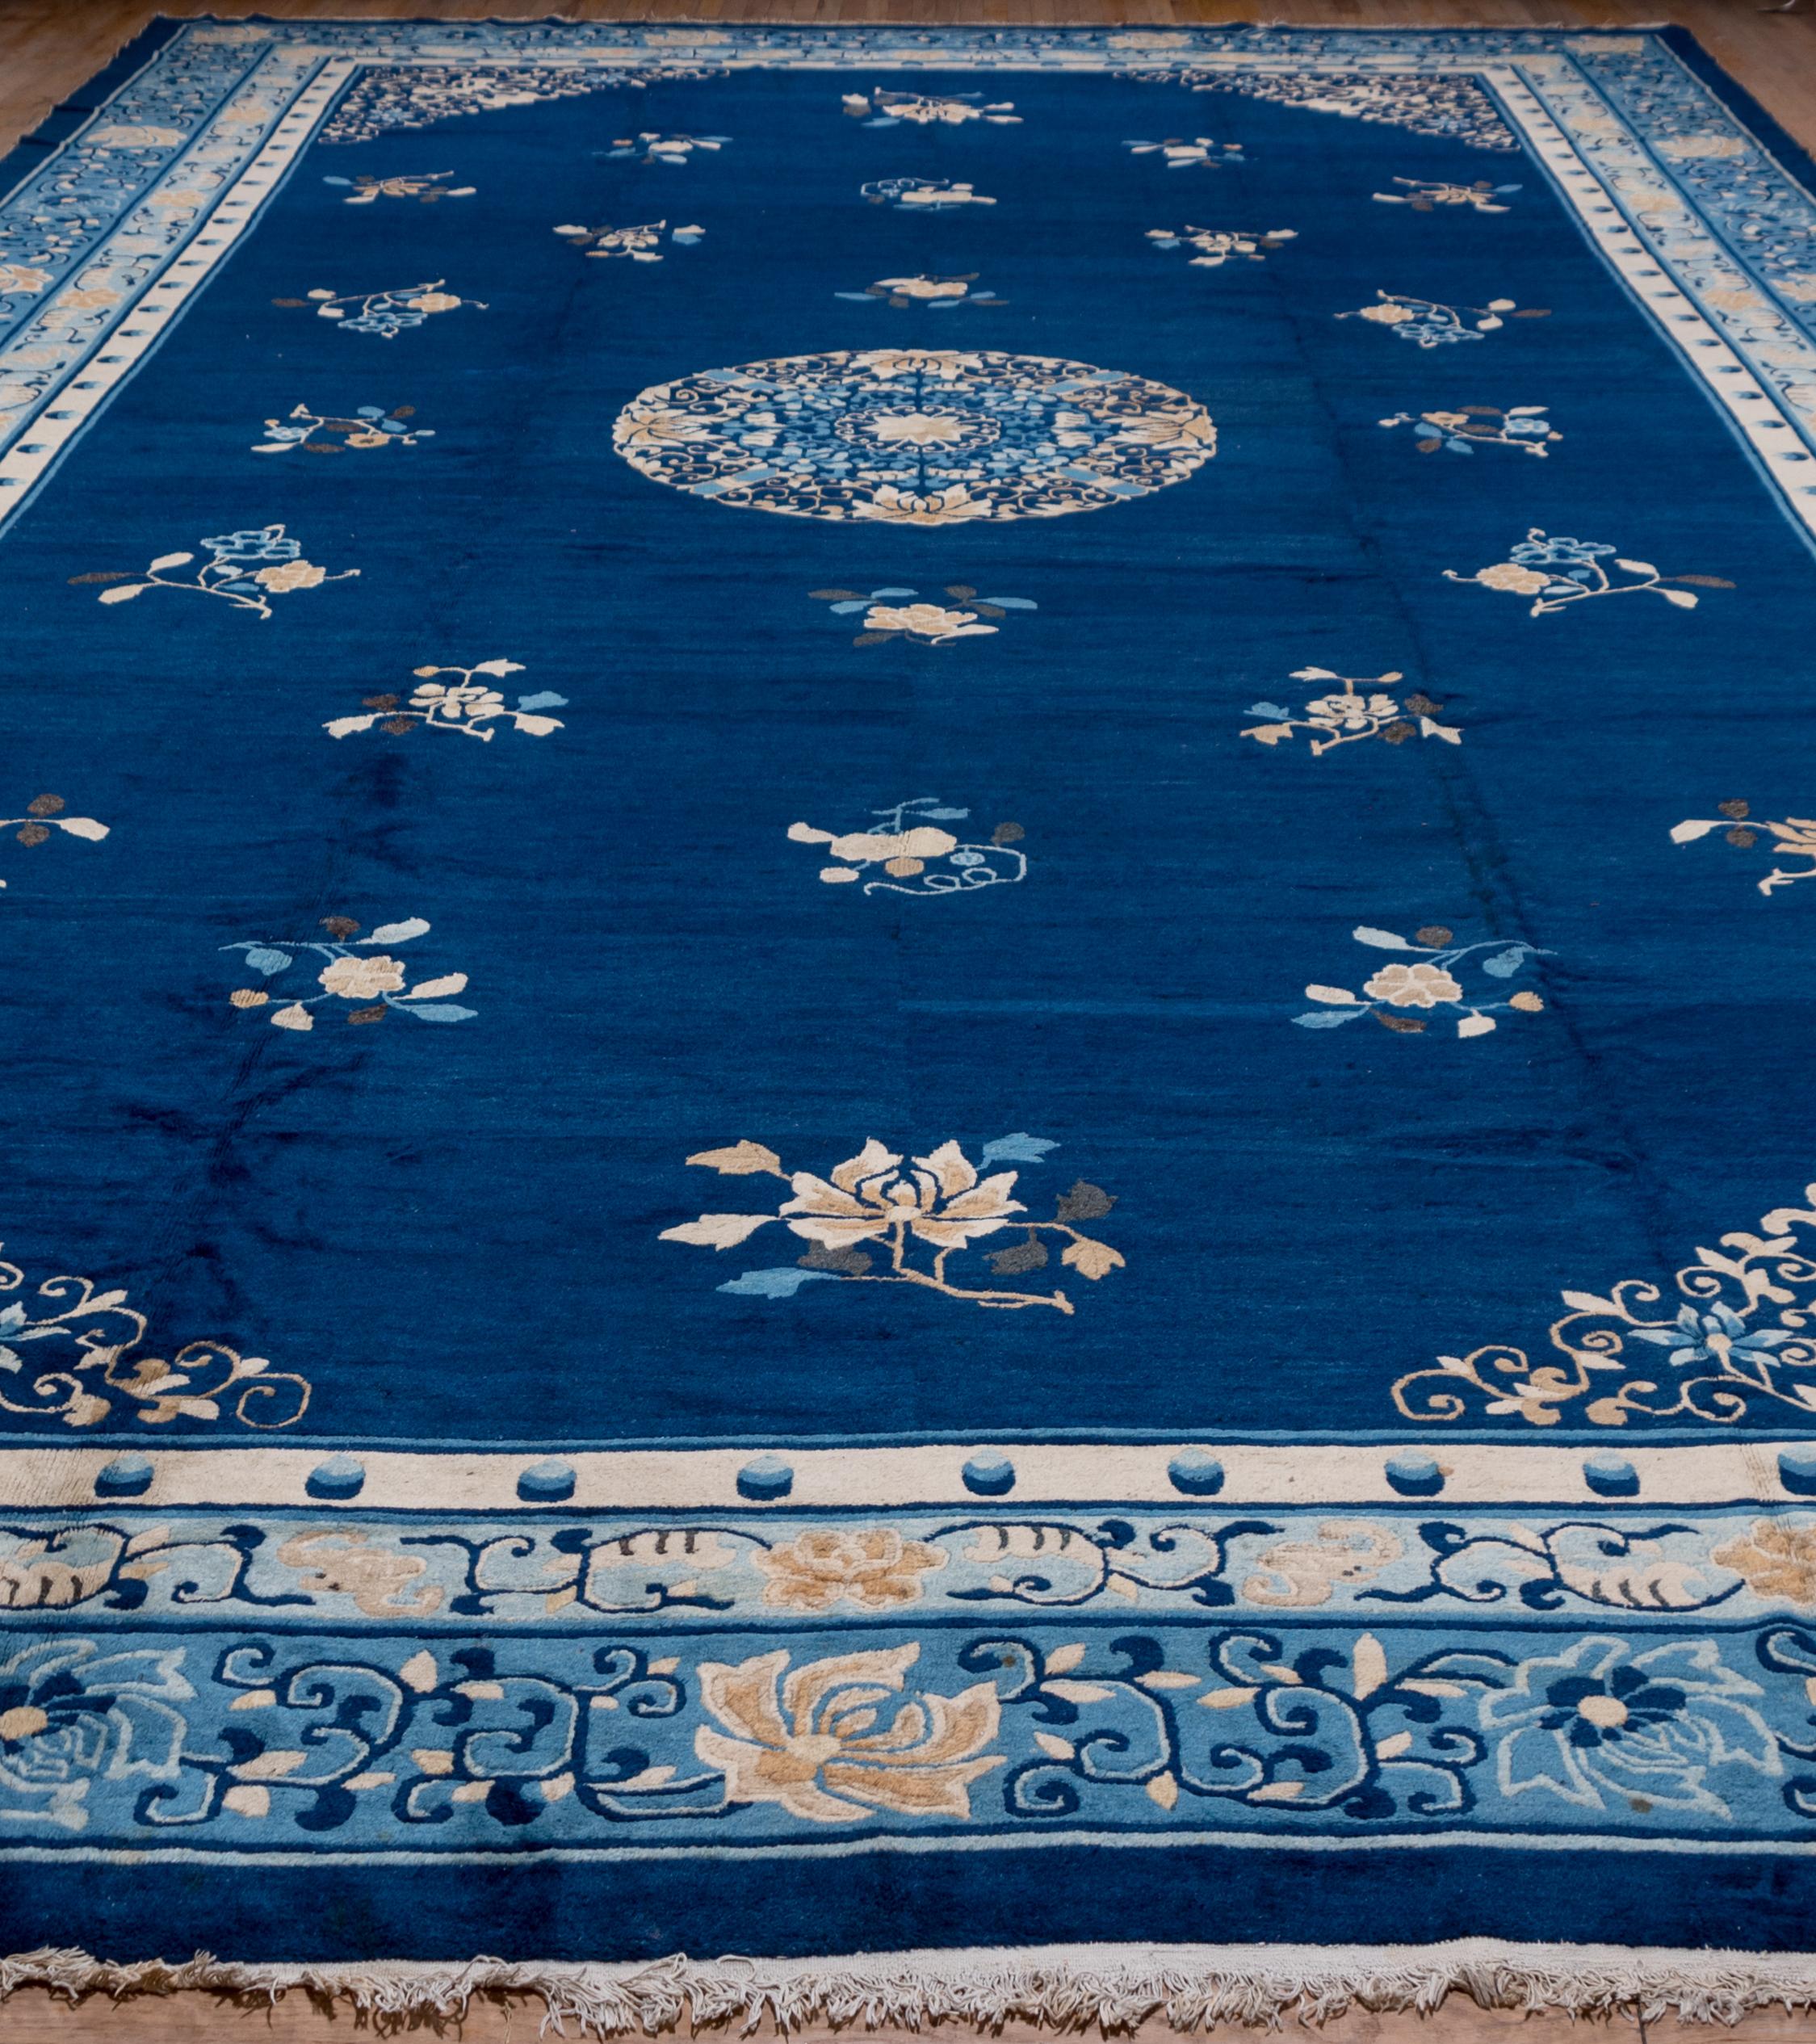 This blue and white Classic Peking workshop carpet has a round floriate medallion, sprays of seasonal flowers and filigree corners with cloud ribbons. The field is a rich deep blue and there are at least three other blues including a light blue in